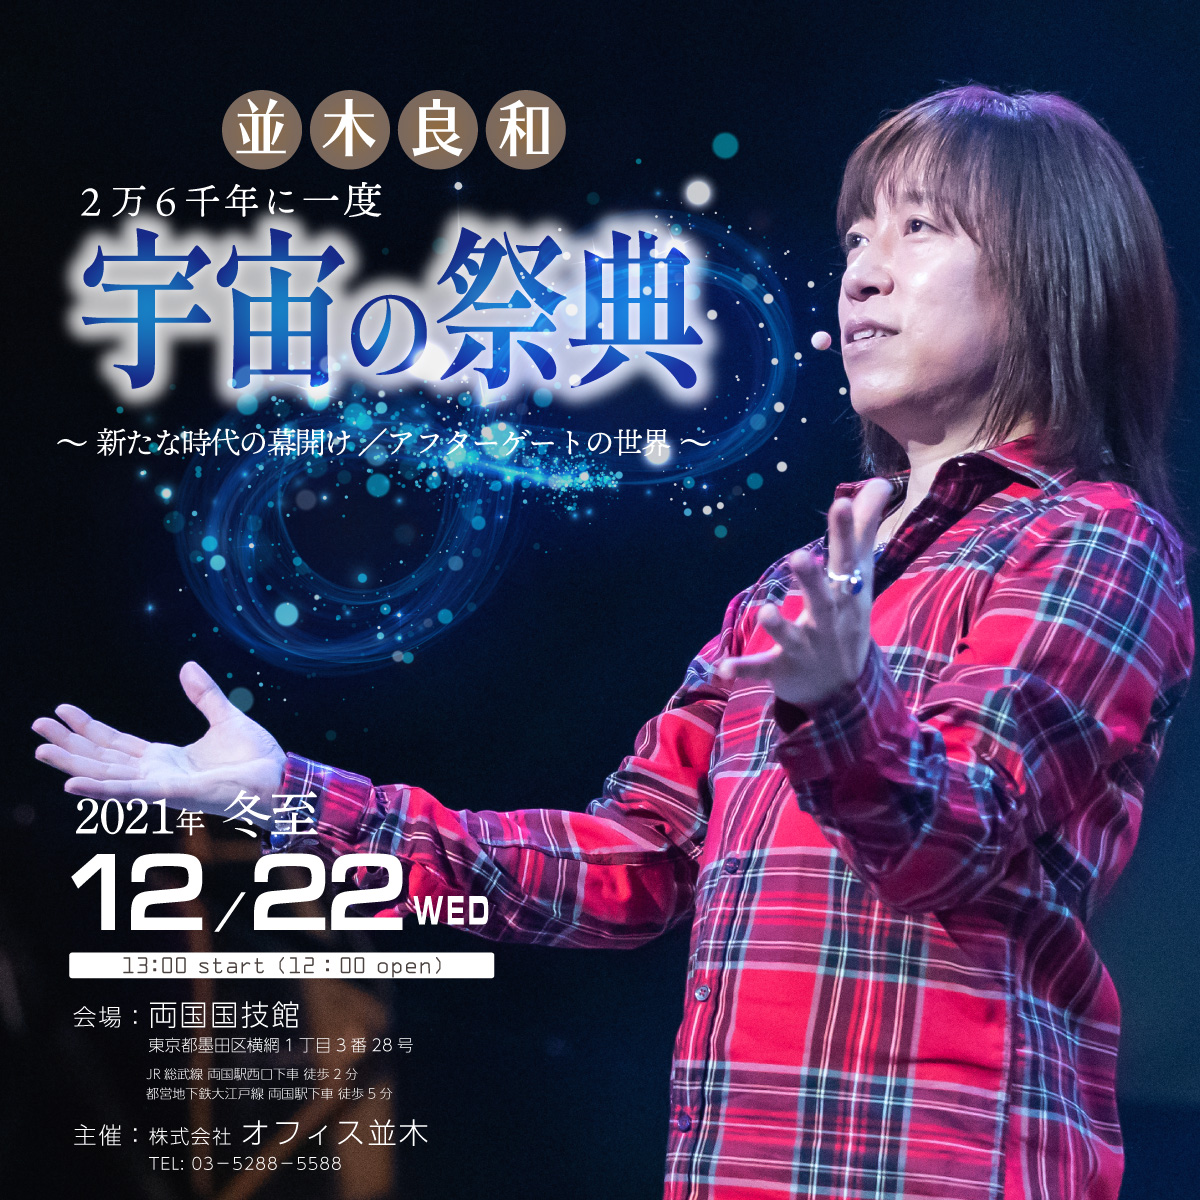 [Streaming+] Yoshikazu Namiki, Winter Solstice 2021; “Festival of the Universe” Once Every 26,000 Years - The Dawn of a New Era / The World of AfterGate - (並木良和 2021年冬至 『宇宙の祭典』2万6千年に一度～新たな時代の幕開け／アフターゲートの世界～)